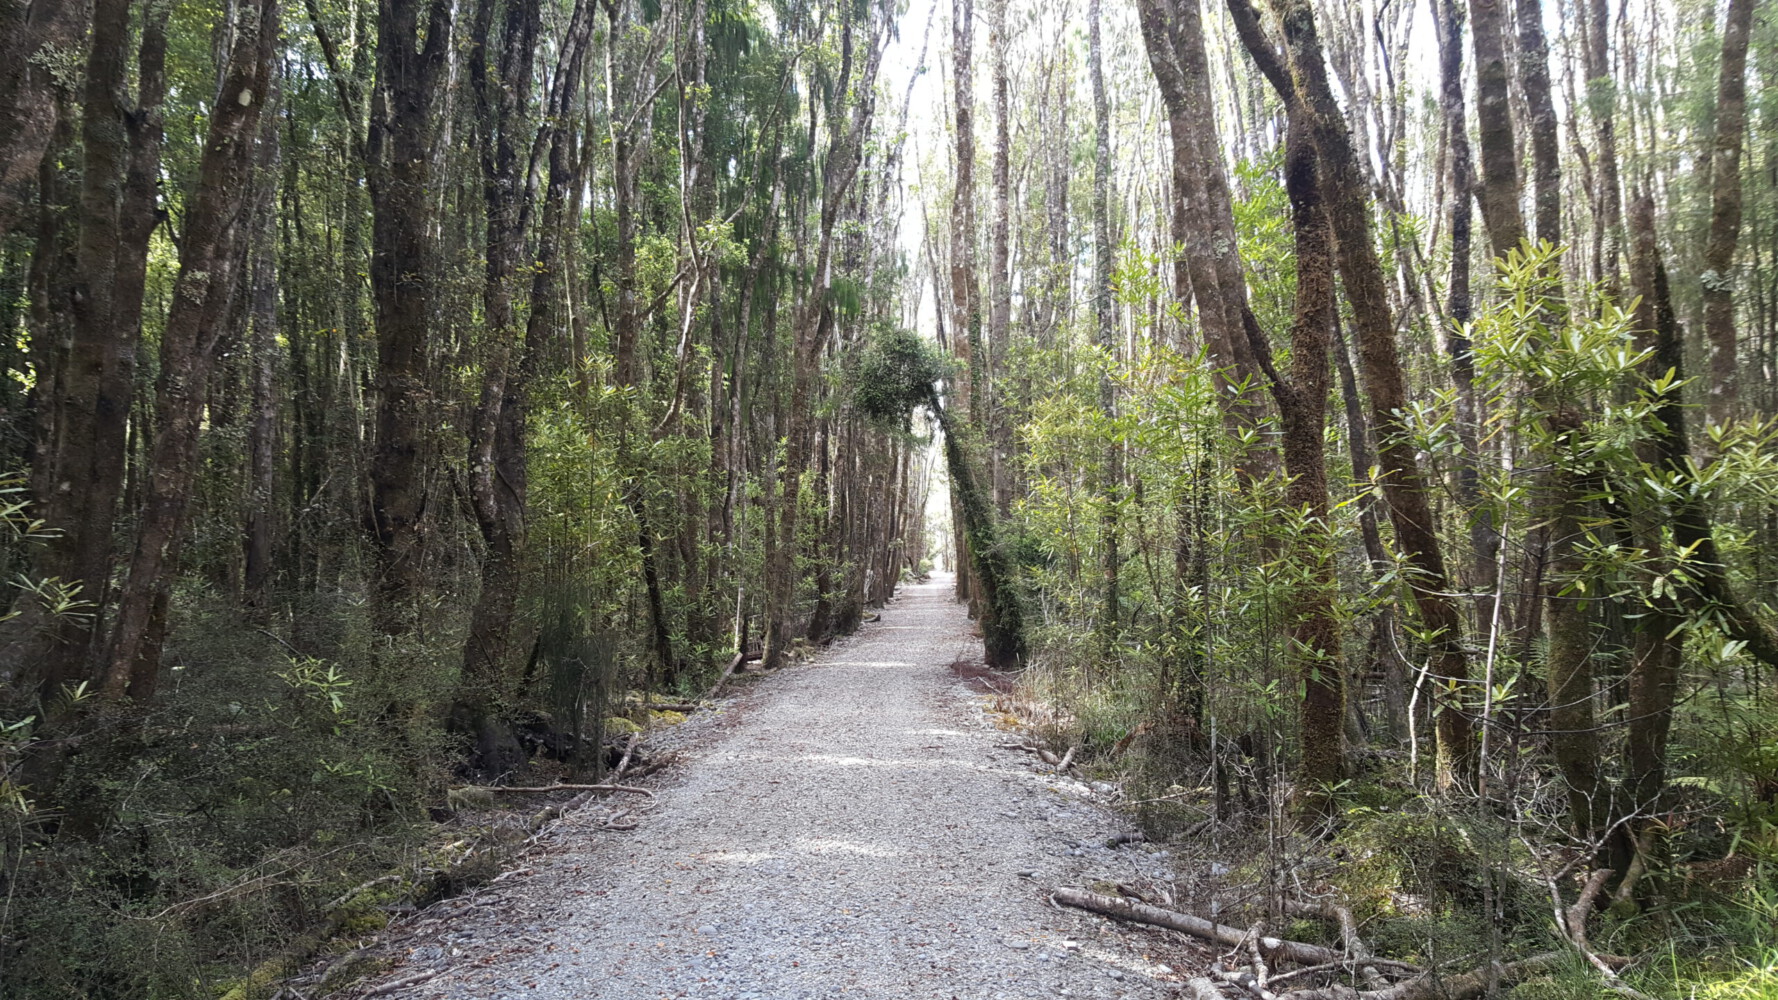 The West Coast Wilderness Trail leads through the jungle near Greymouth